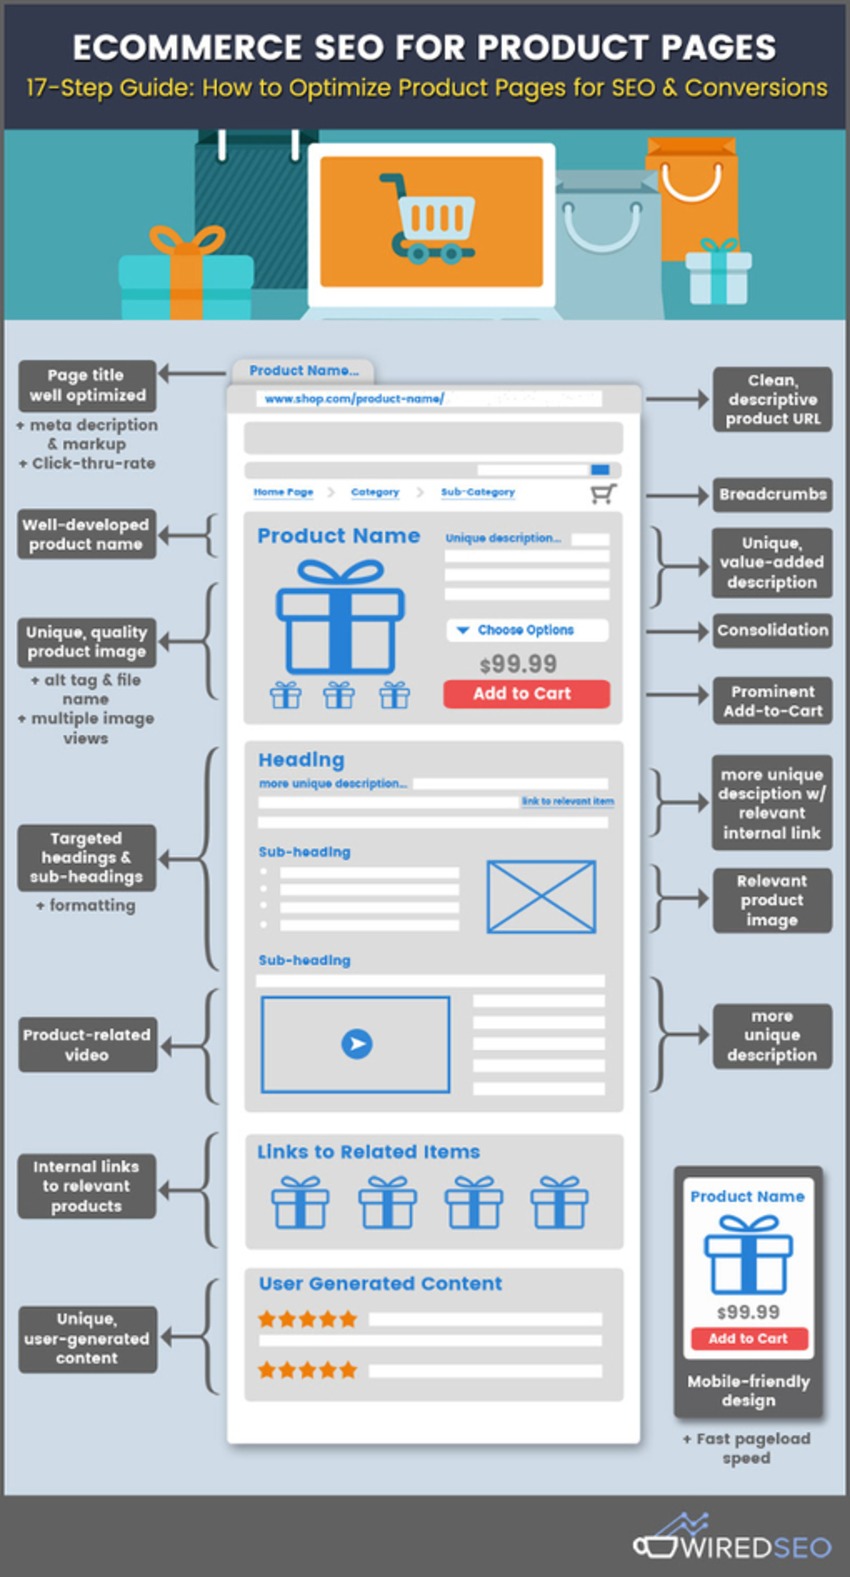 E-Commerce SEO for Product Pages: A 17-Step Guide [Infographic] - MarketingProfs | The MarTech Digest | Scoop.it